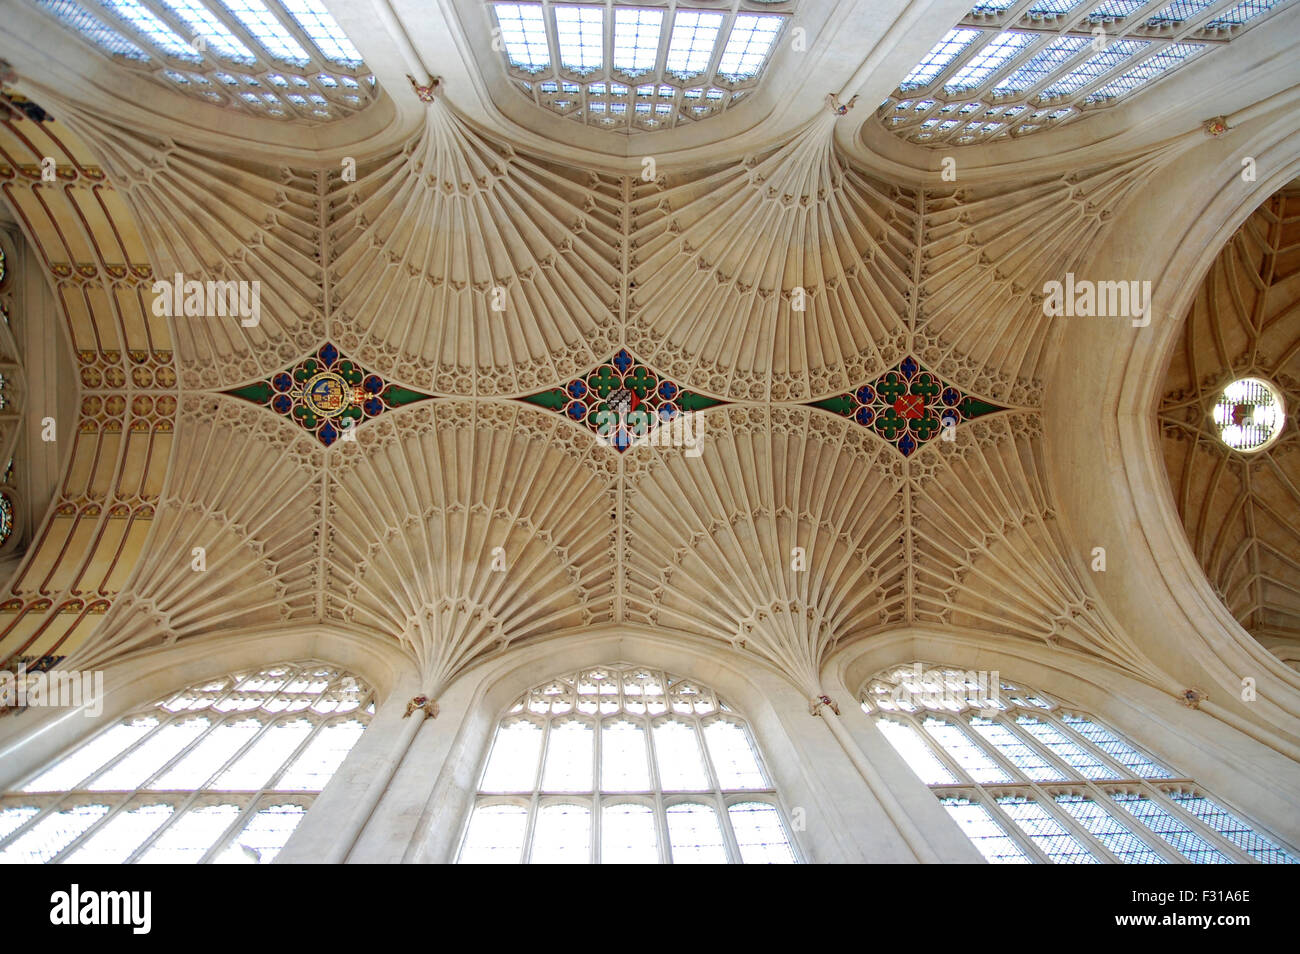 The stone fan vaulting over the nave of Bath Abbey by Sir George Gilbert Scott in Bath, England. Stock Photo